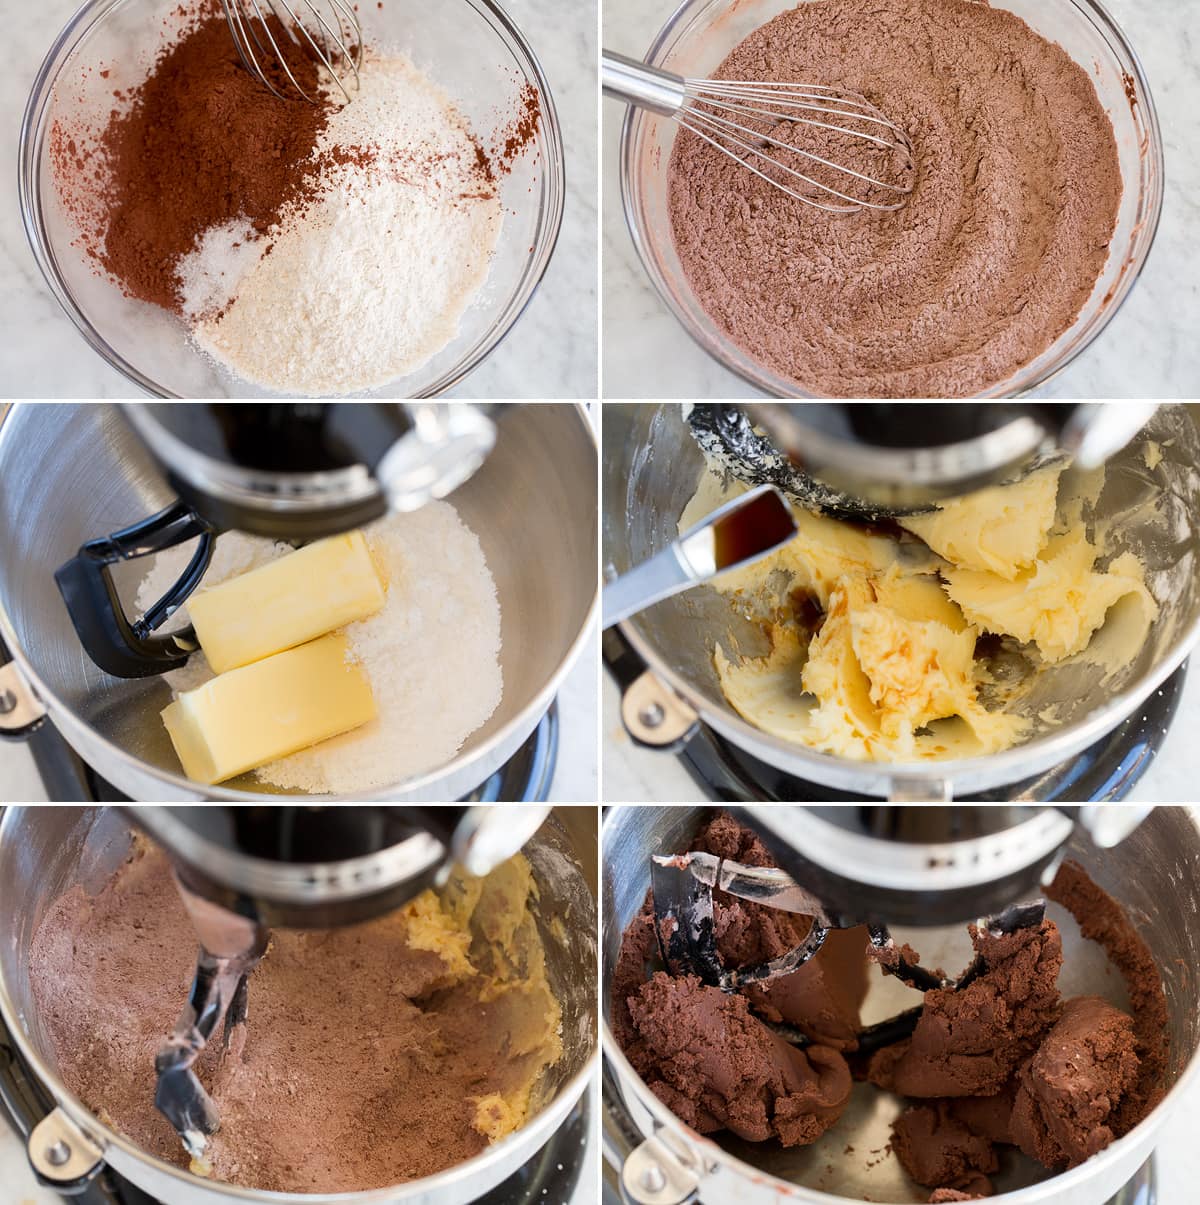 Collage of photos showing how to make chocolate cookie dough batter.